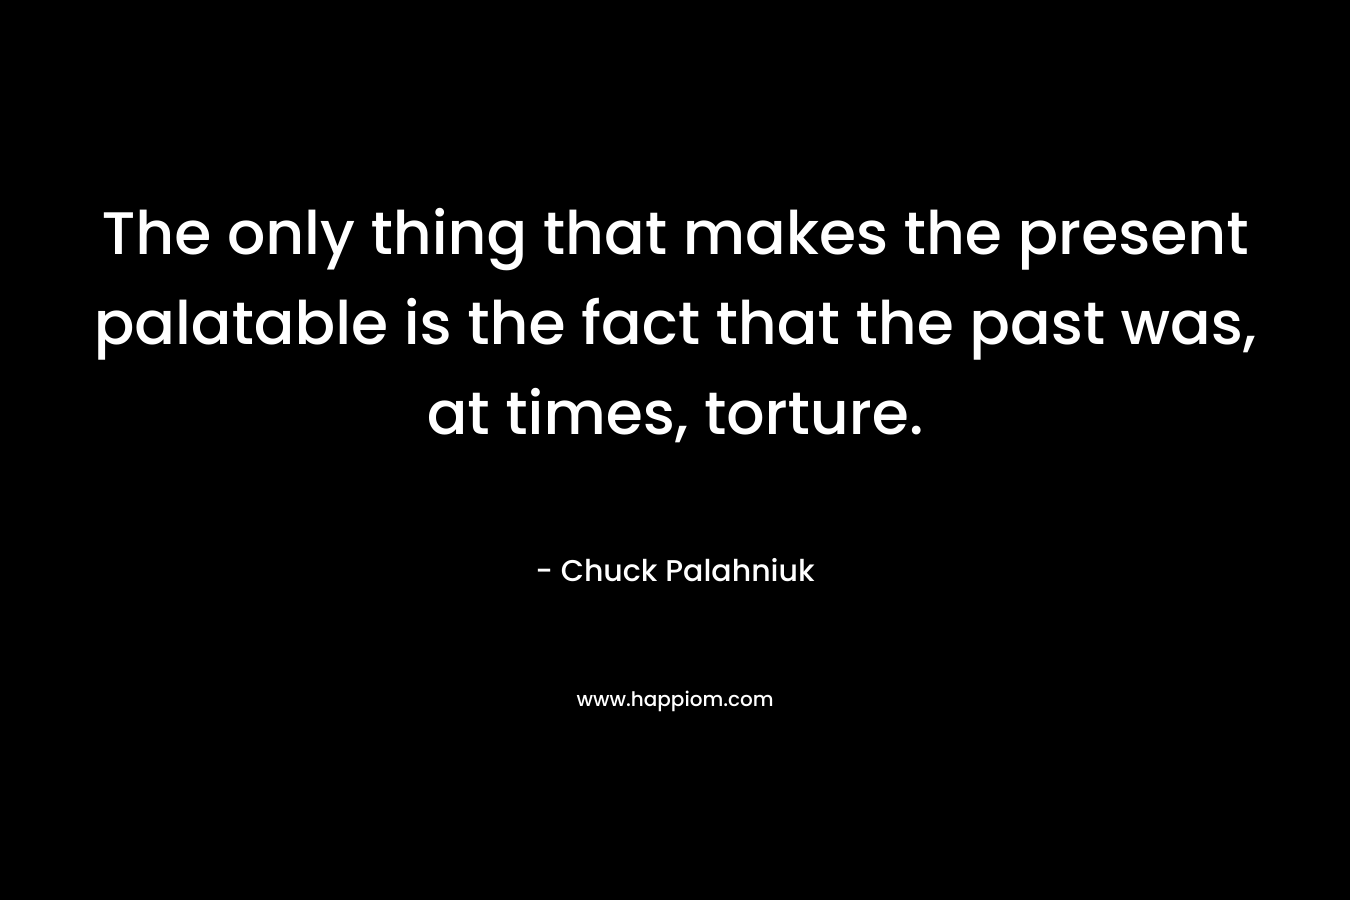 The only thing that makes the present palatable is the fact that the past was, at times, torture.